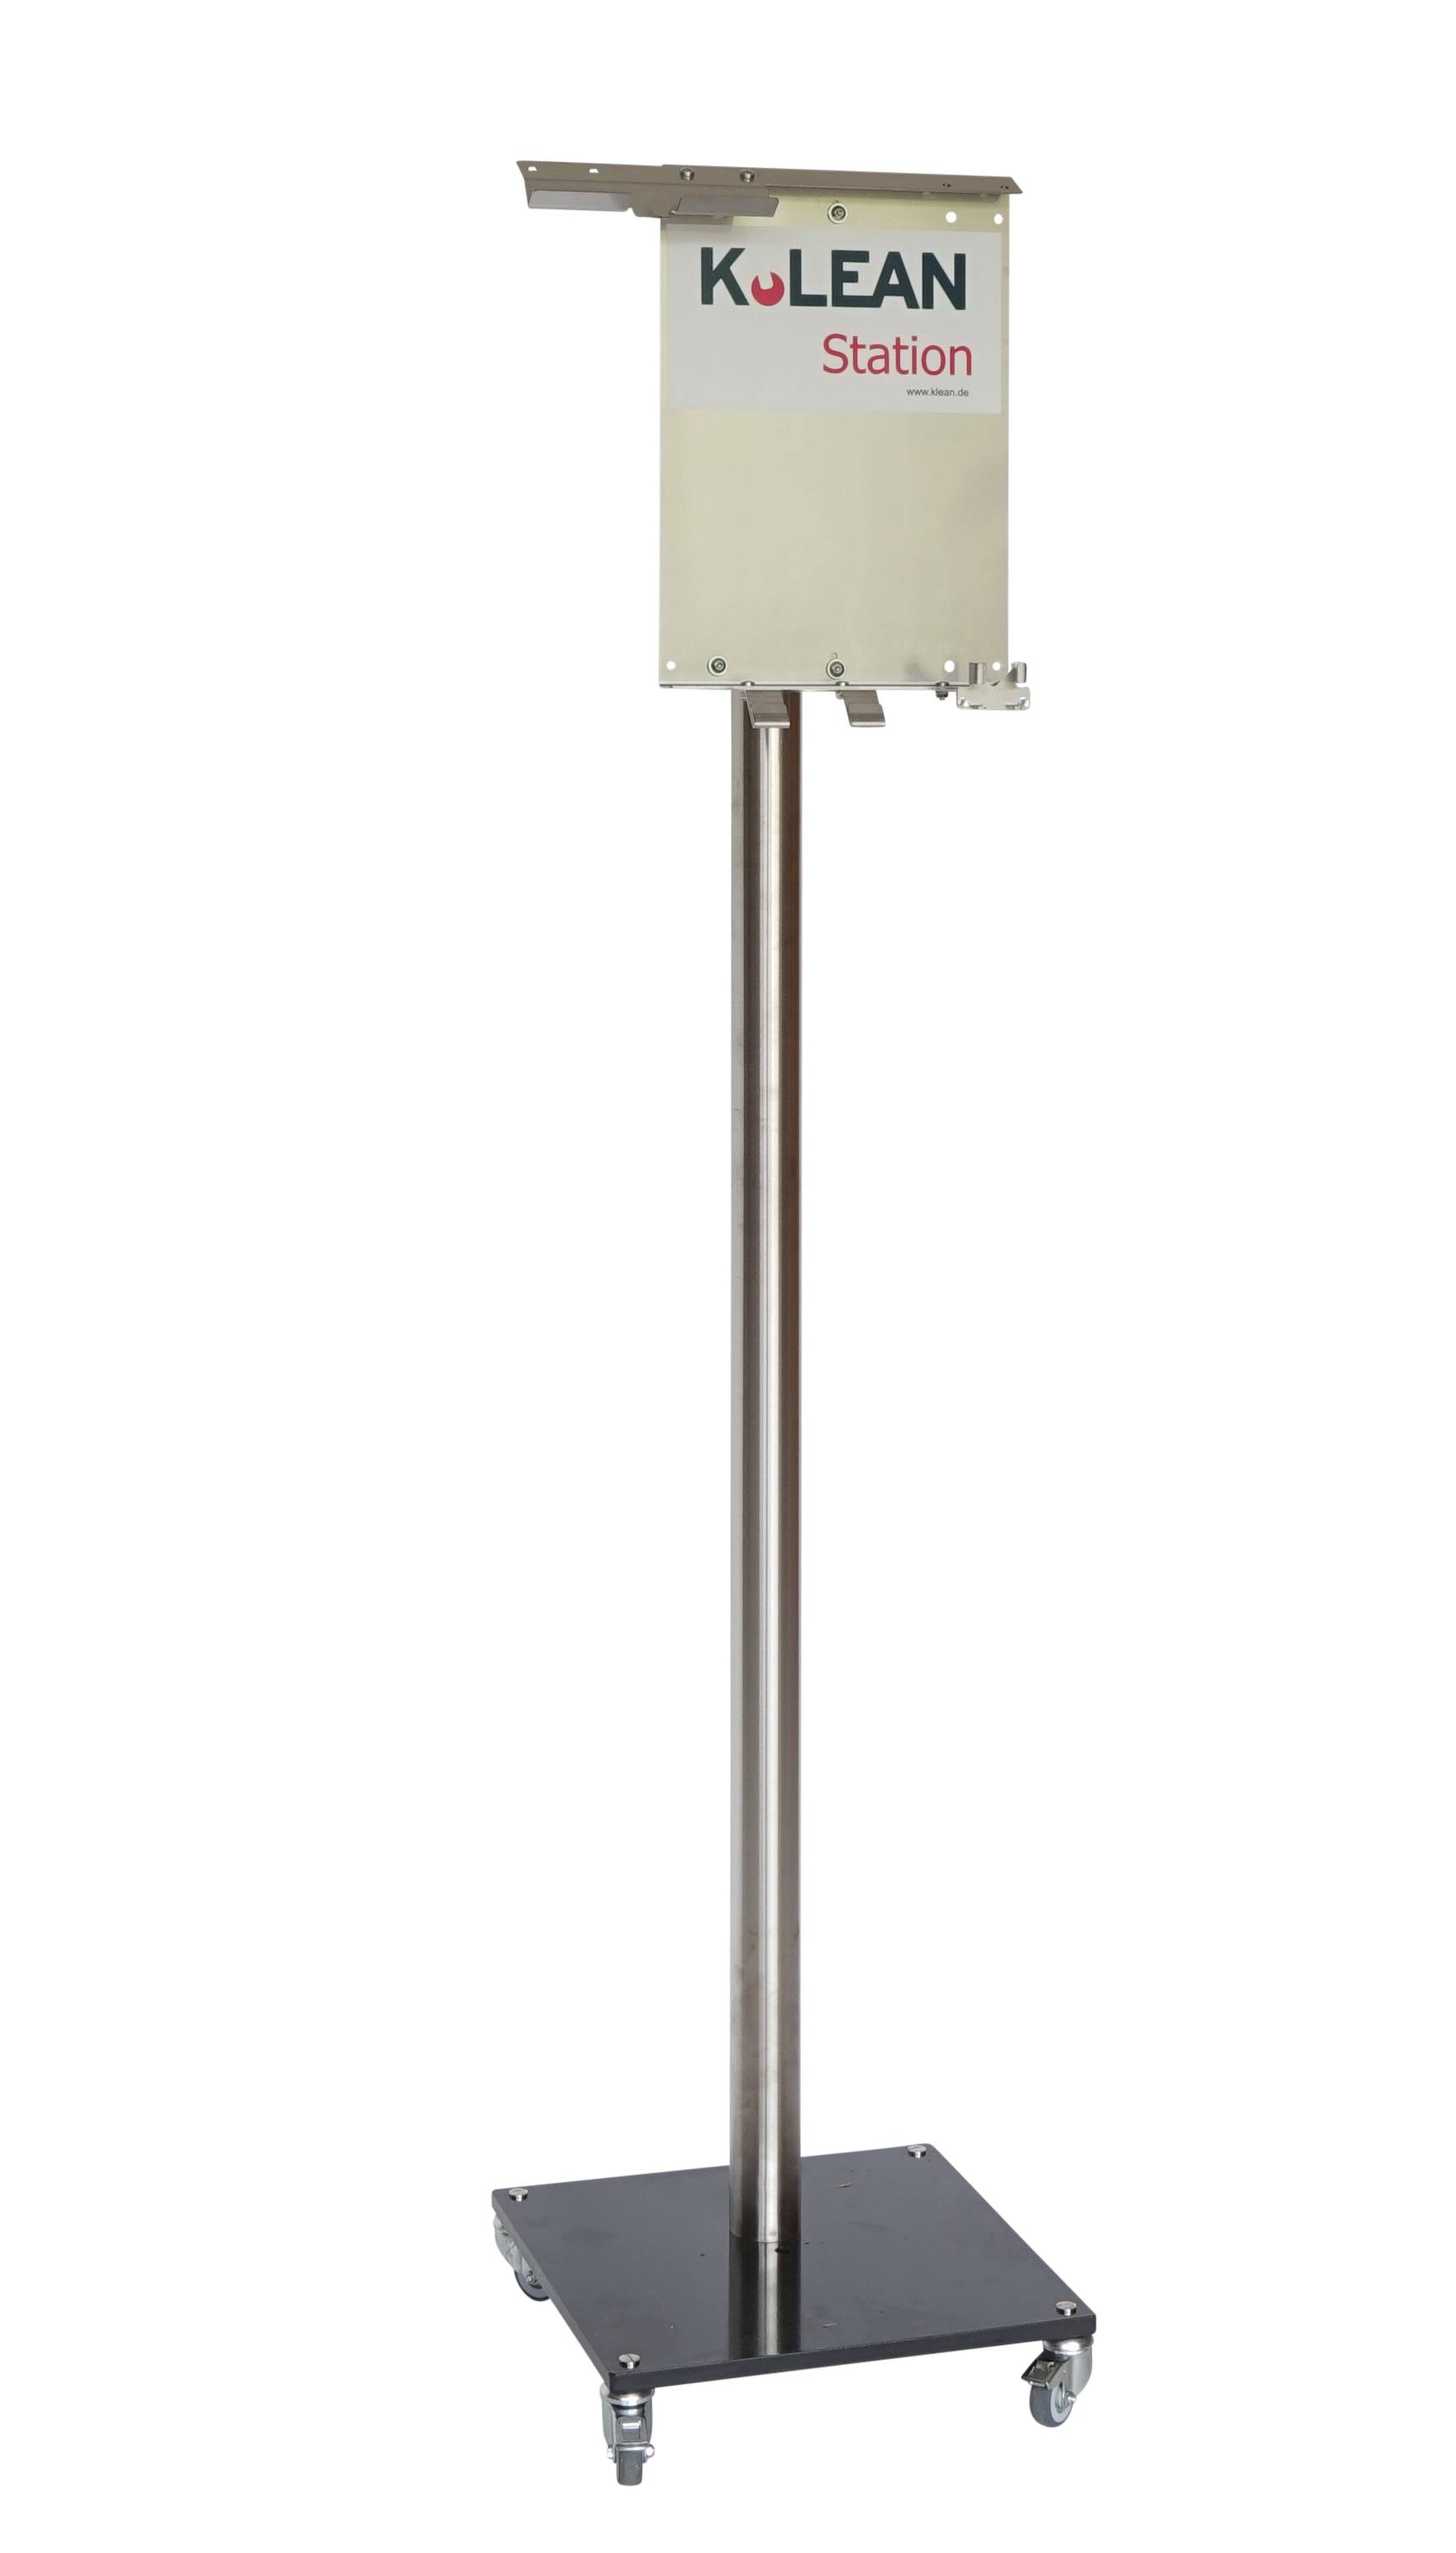 K.Lean Station 300-3 with stand - stainless steel